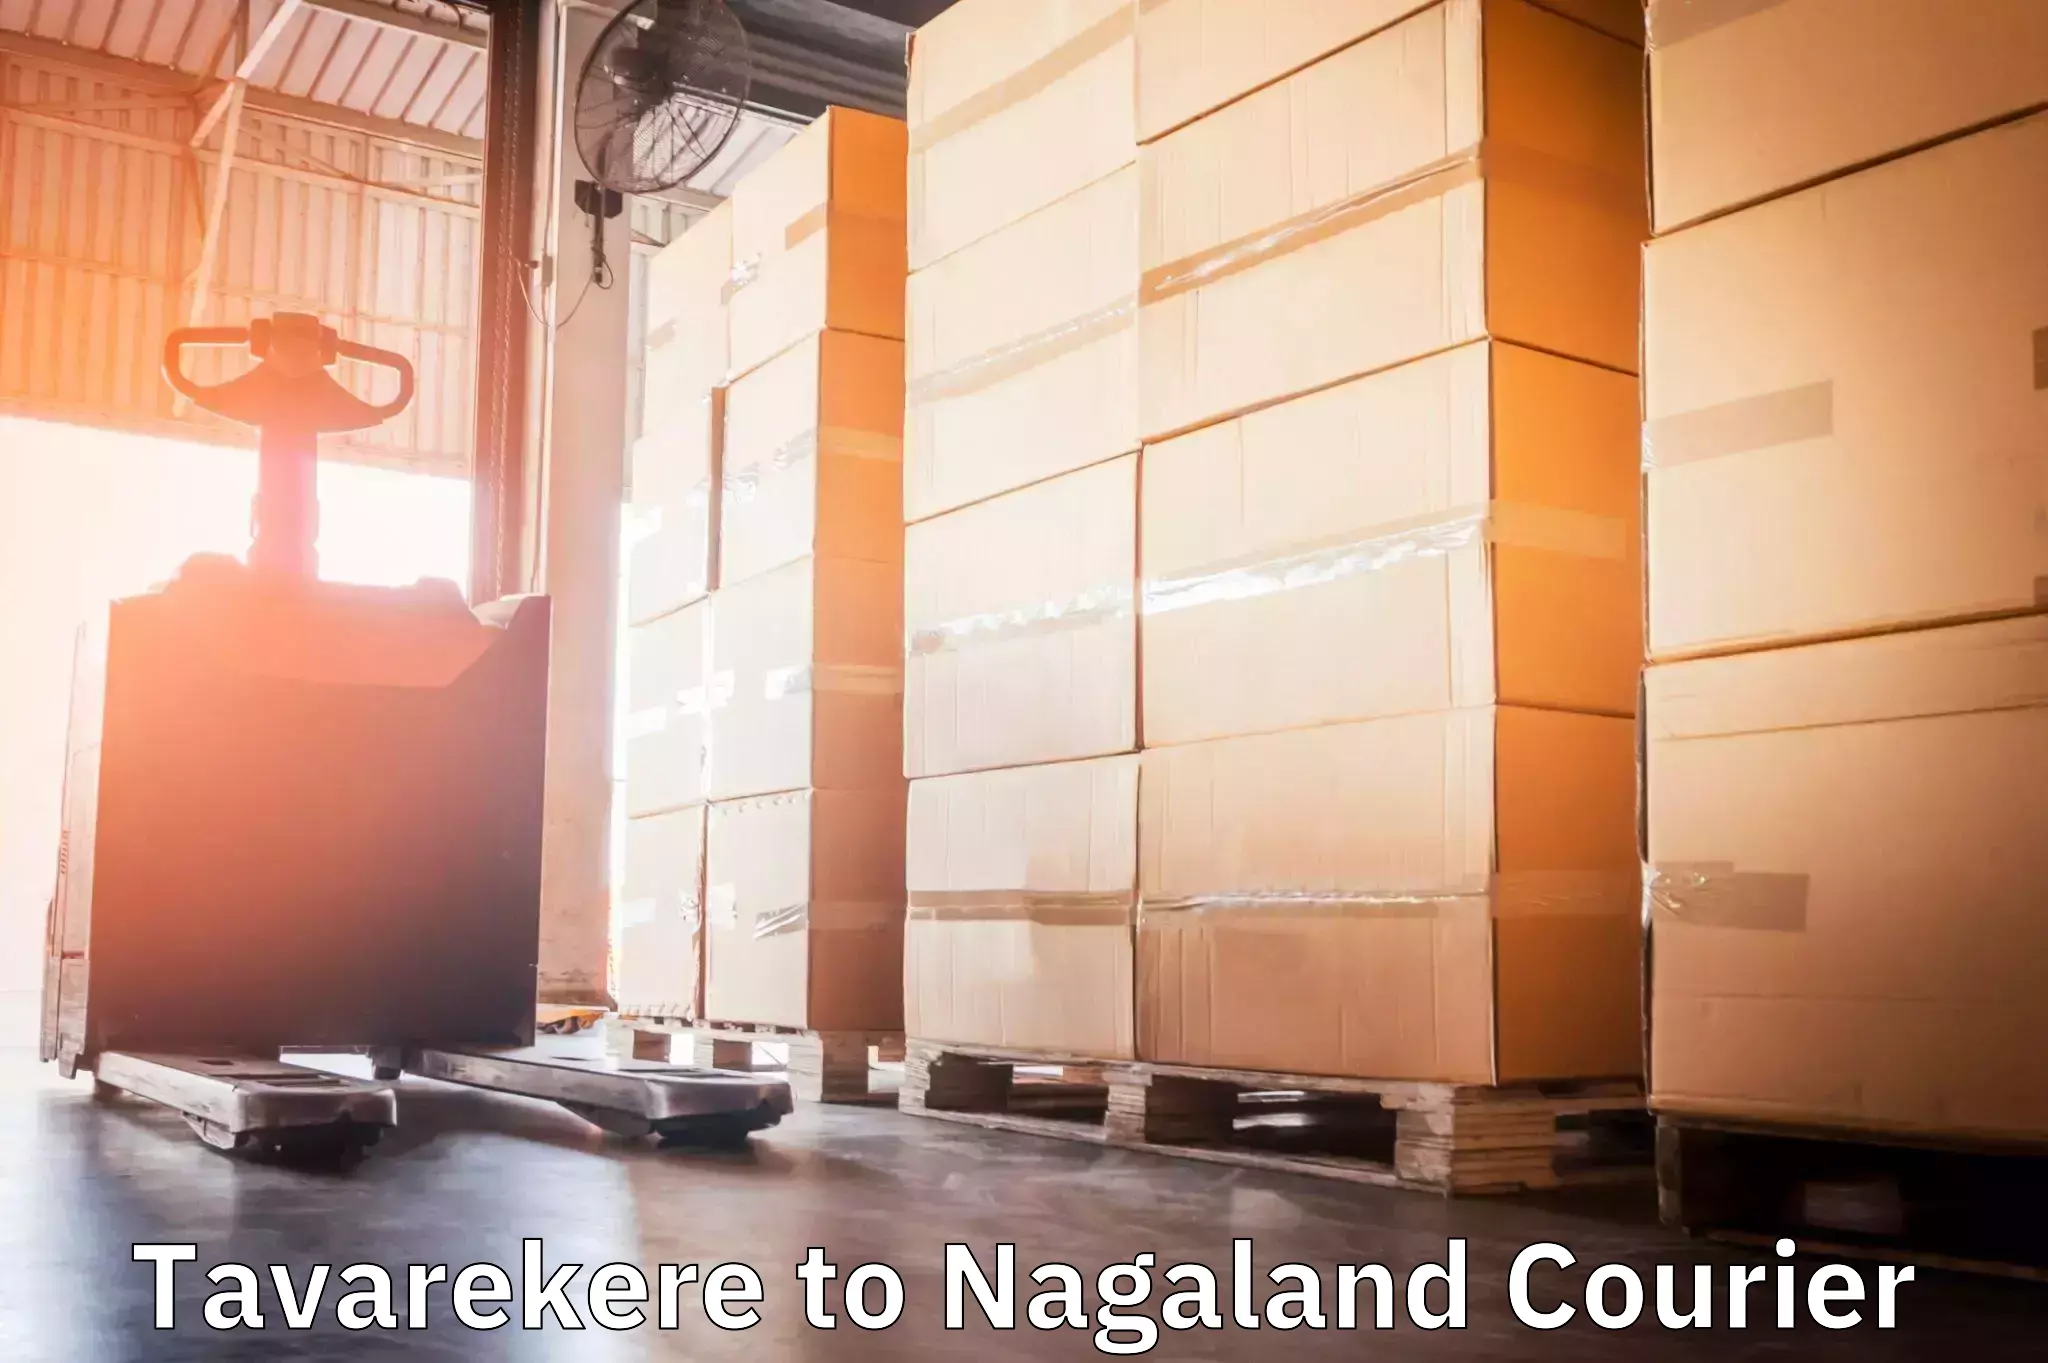 Reliable delivery network Tavarekere to Nagaland